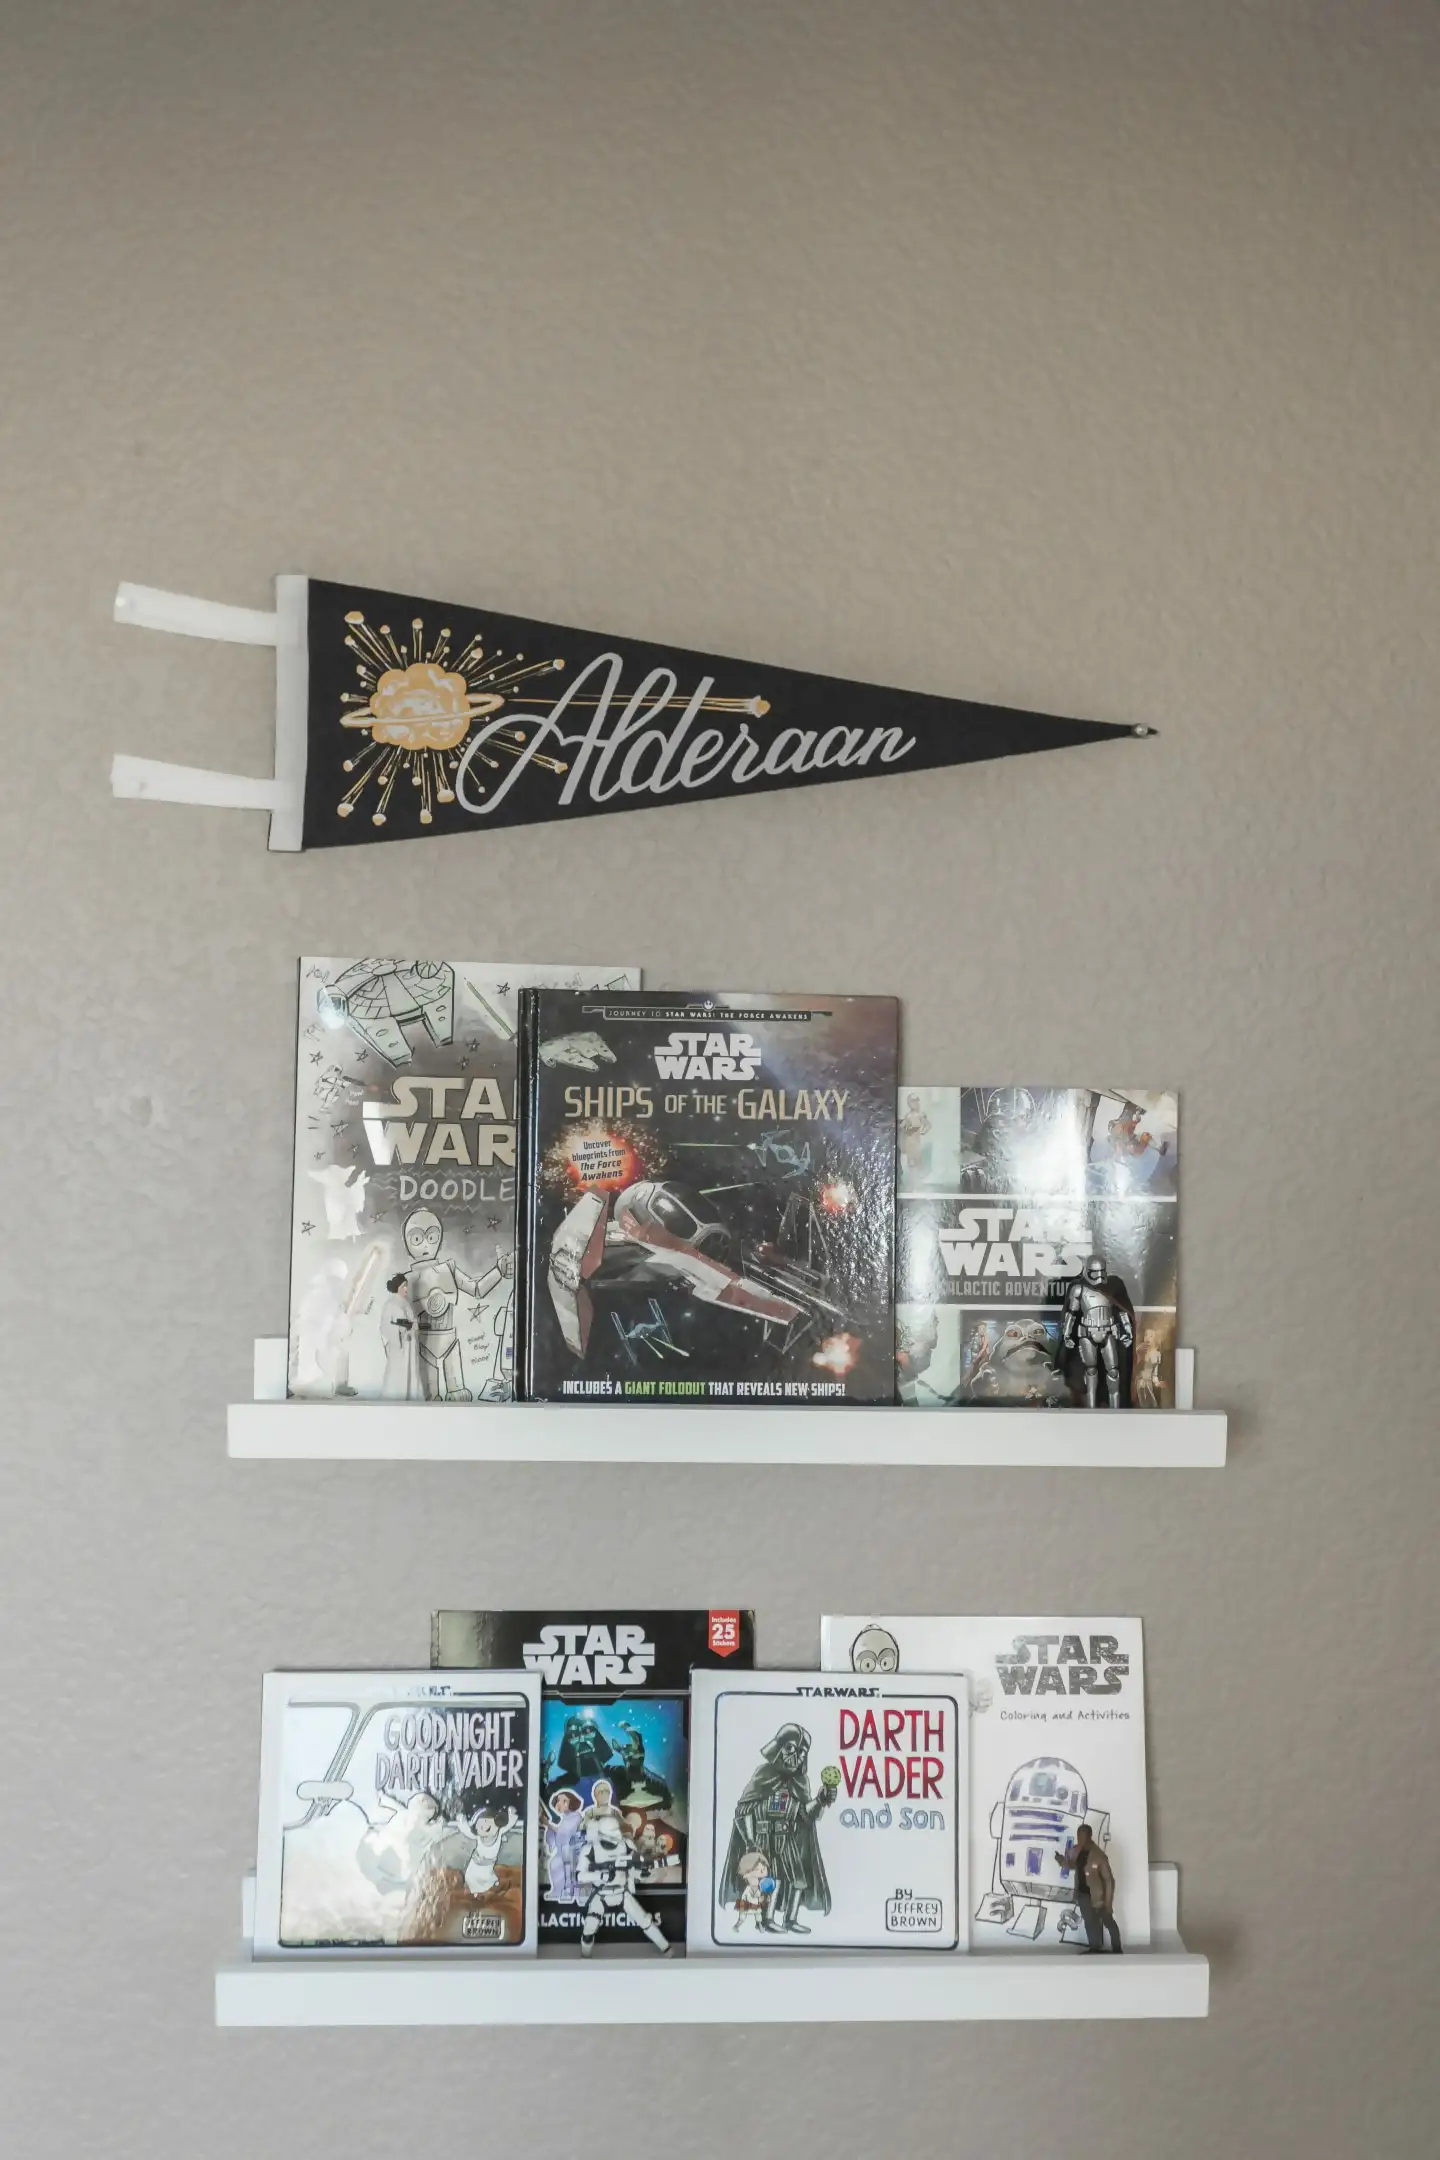 What About An Alderaan Star Wars Pennant?